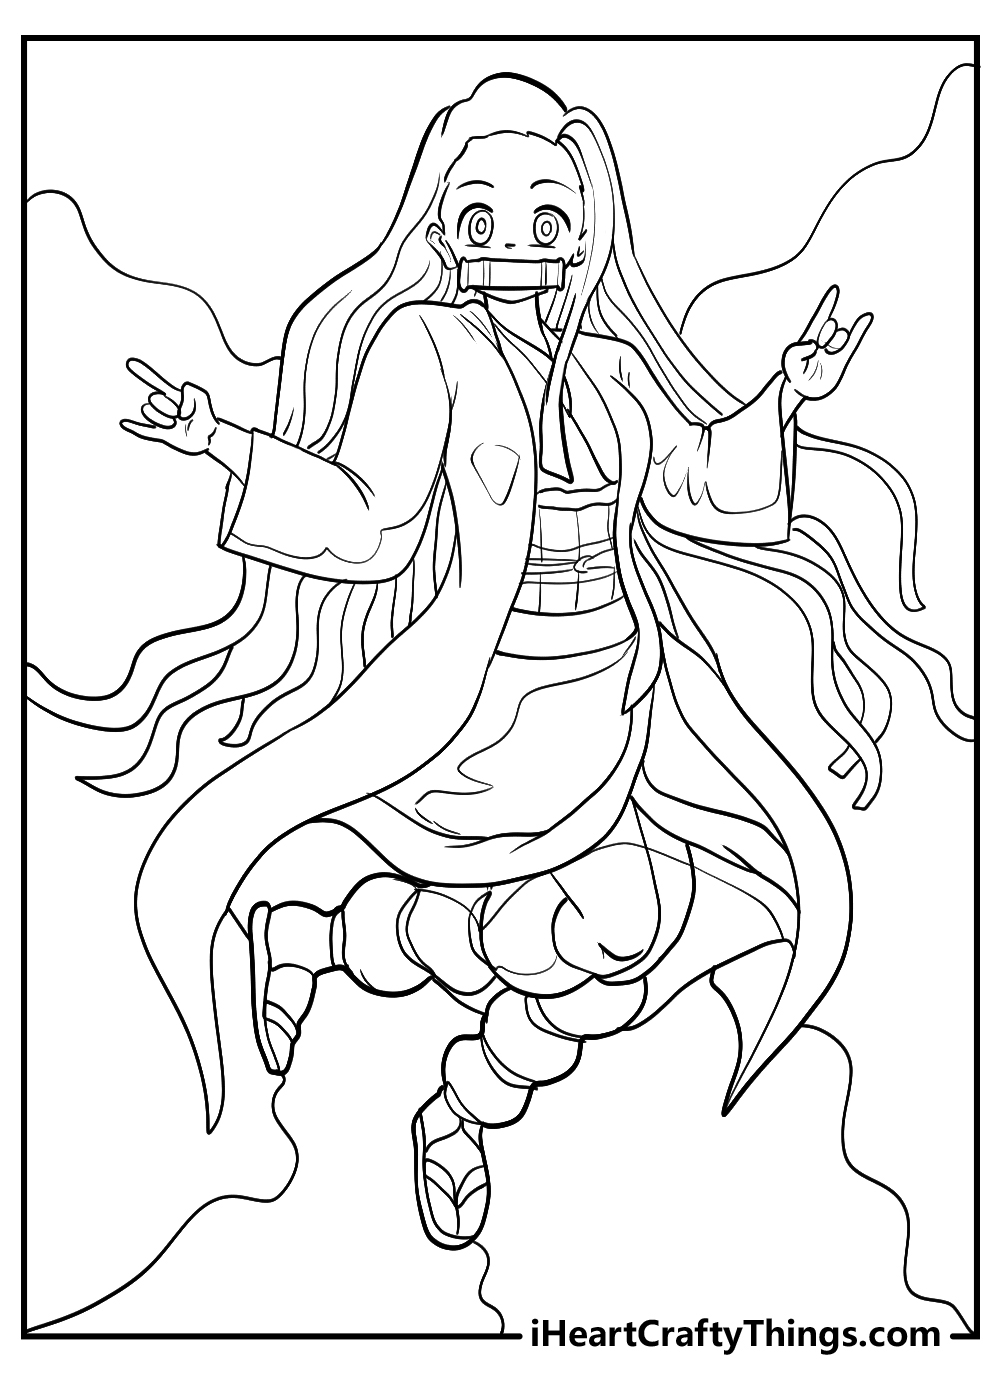 Nezuko Colouring Pages Printable for Free Download